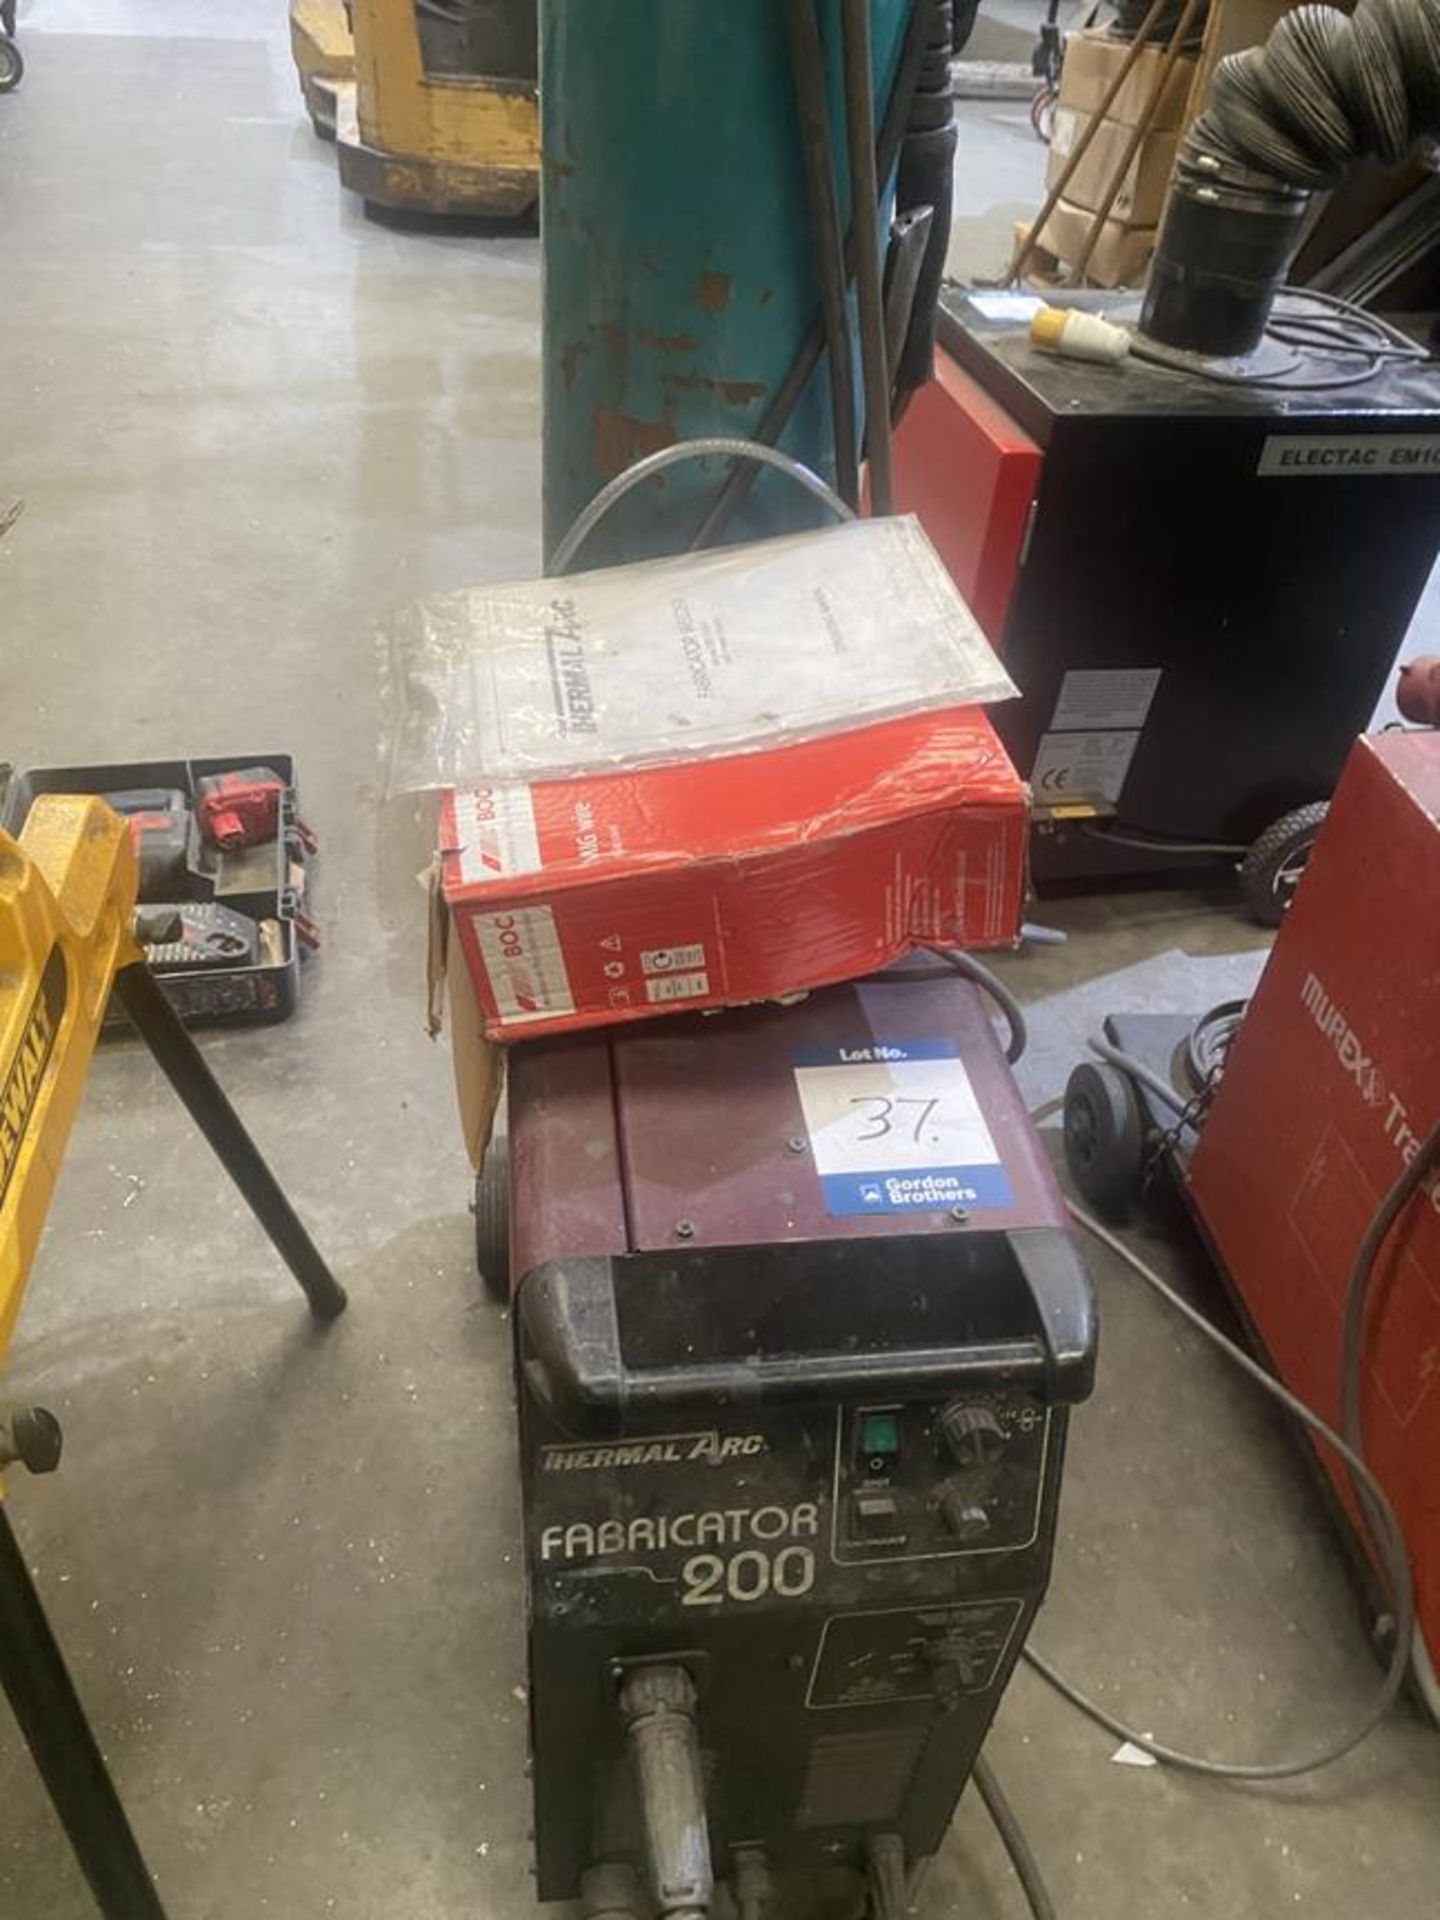 Thermal Arc fabricator 200 mig welder and torch 240v - Image 2 of 3